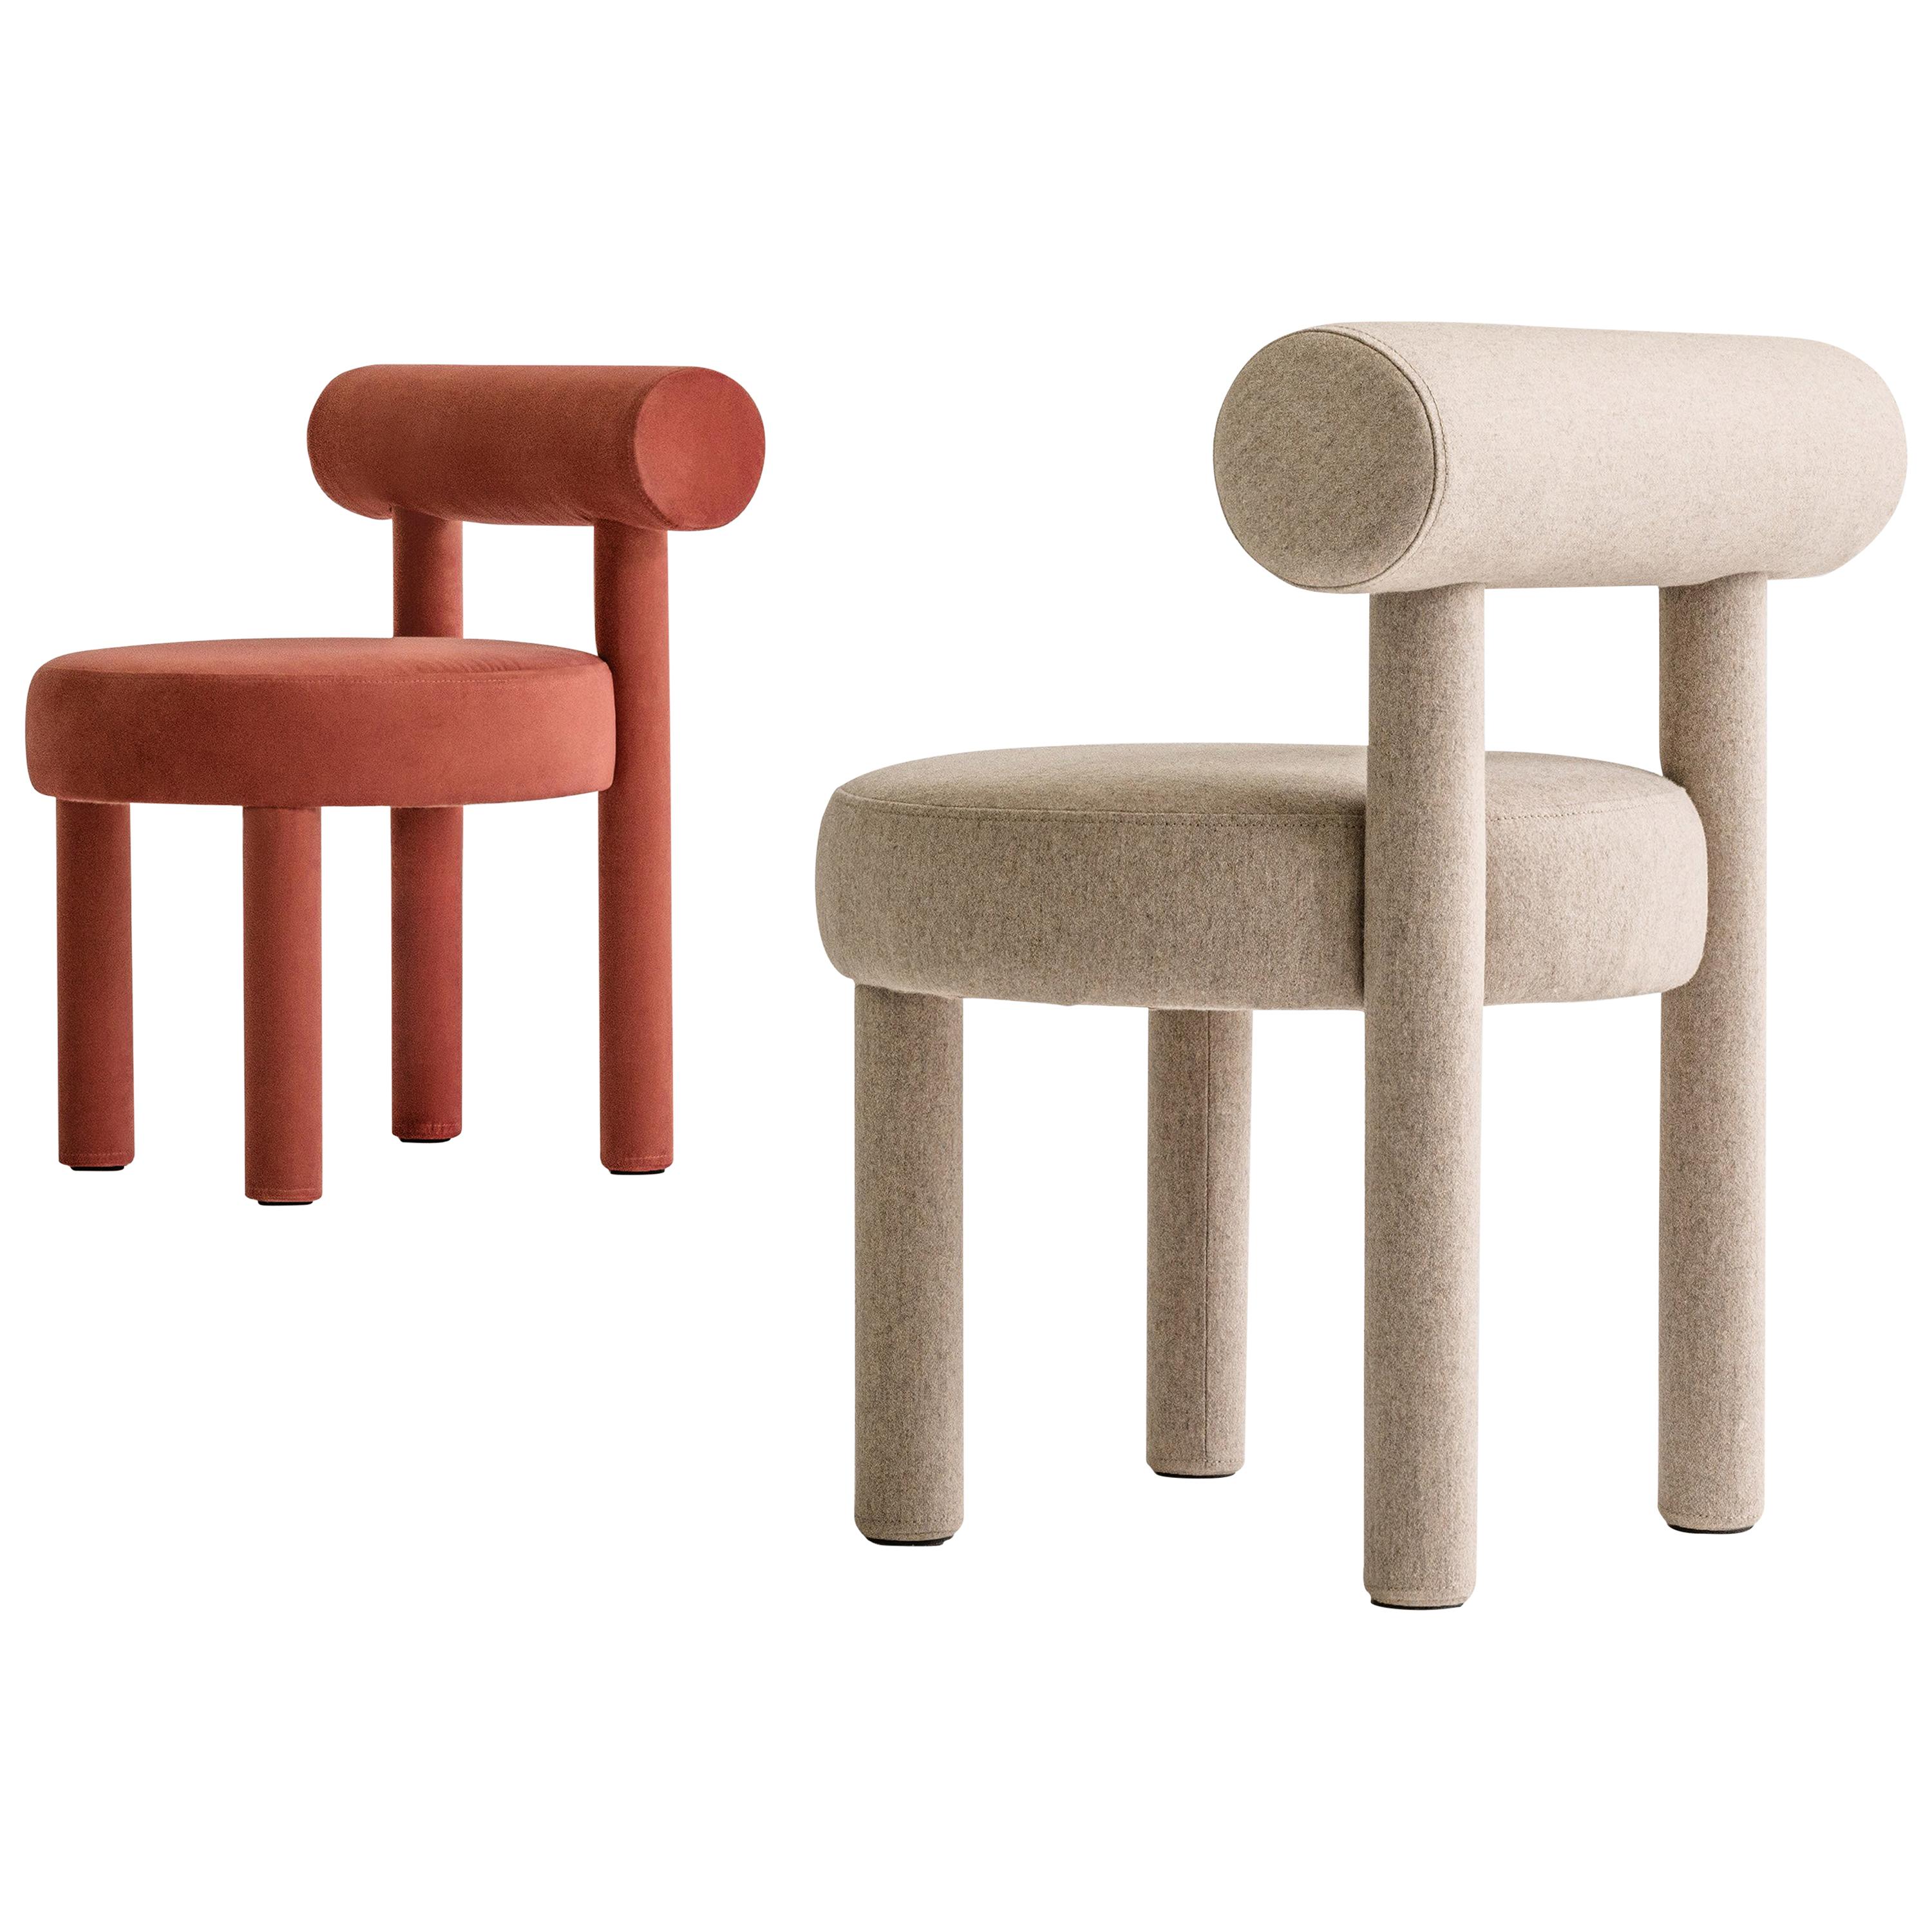 Set of Two Modern Dining Chair Gropius CS1 by Noom